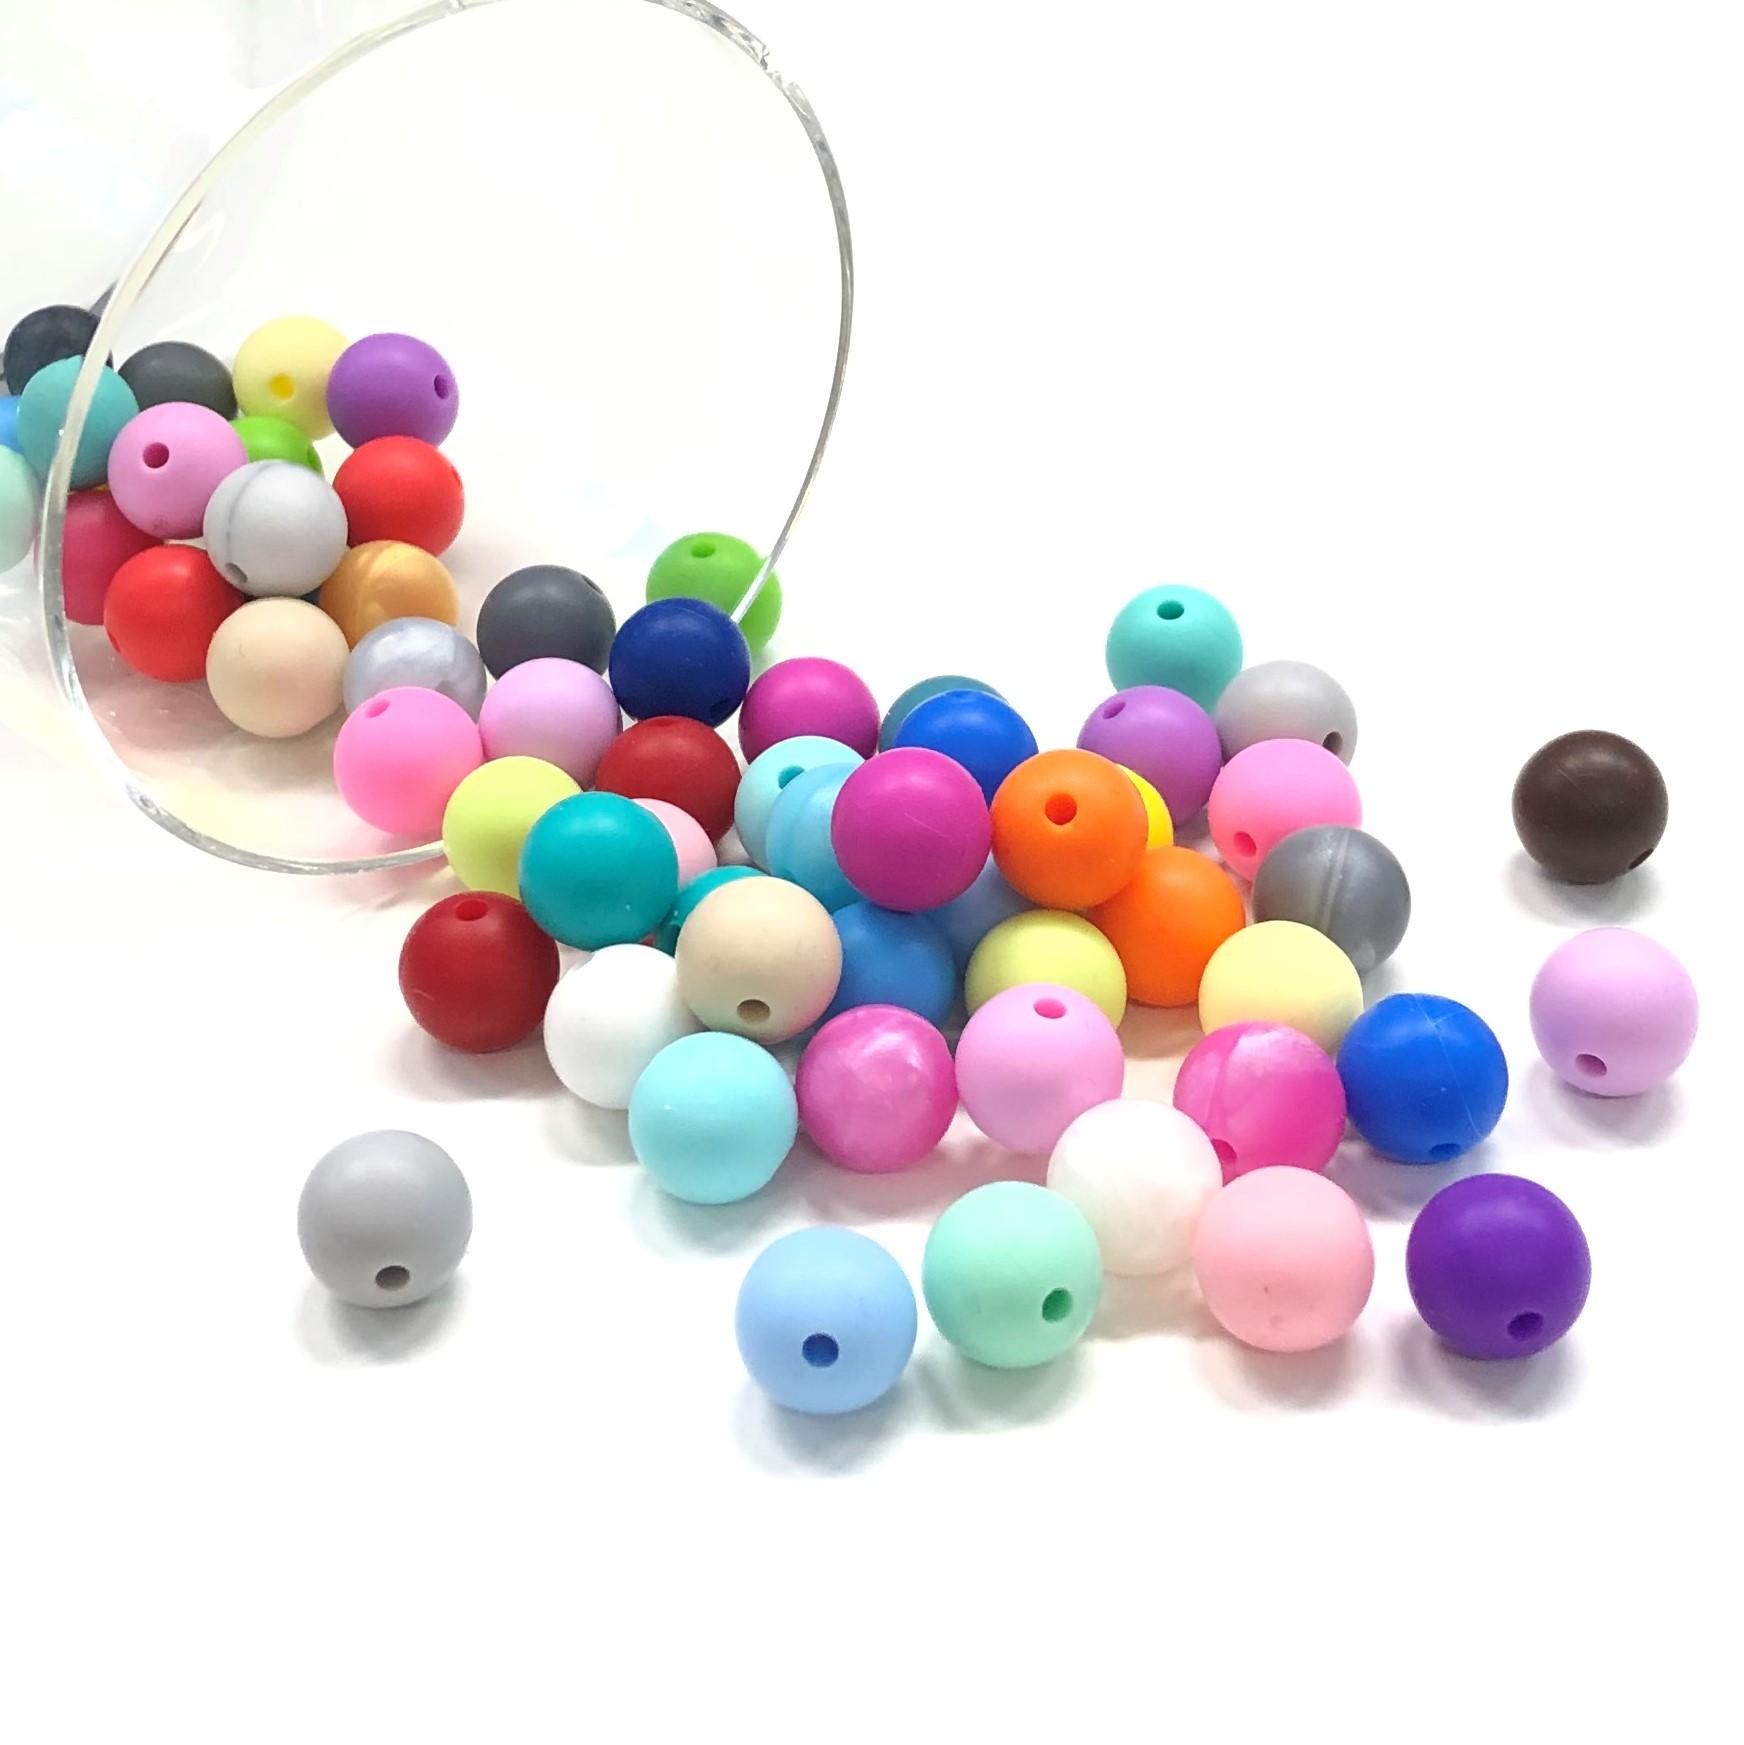 12mm Silicone Beads, 100PCS Silicone Beads Bulk Spacer Beads Focal Cute,  Yellow